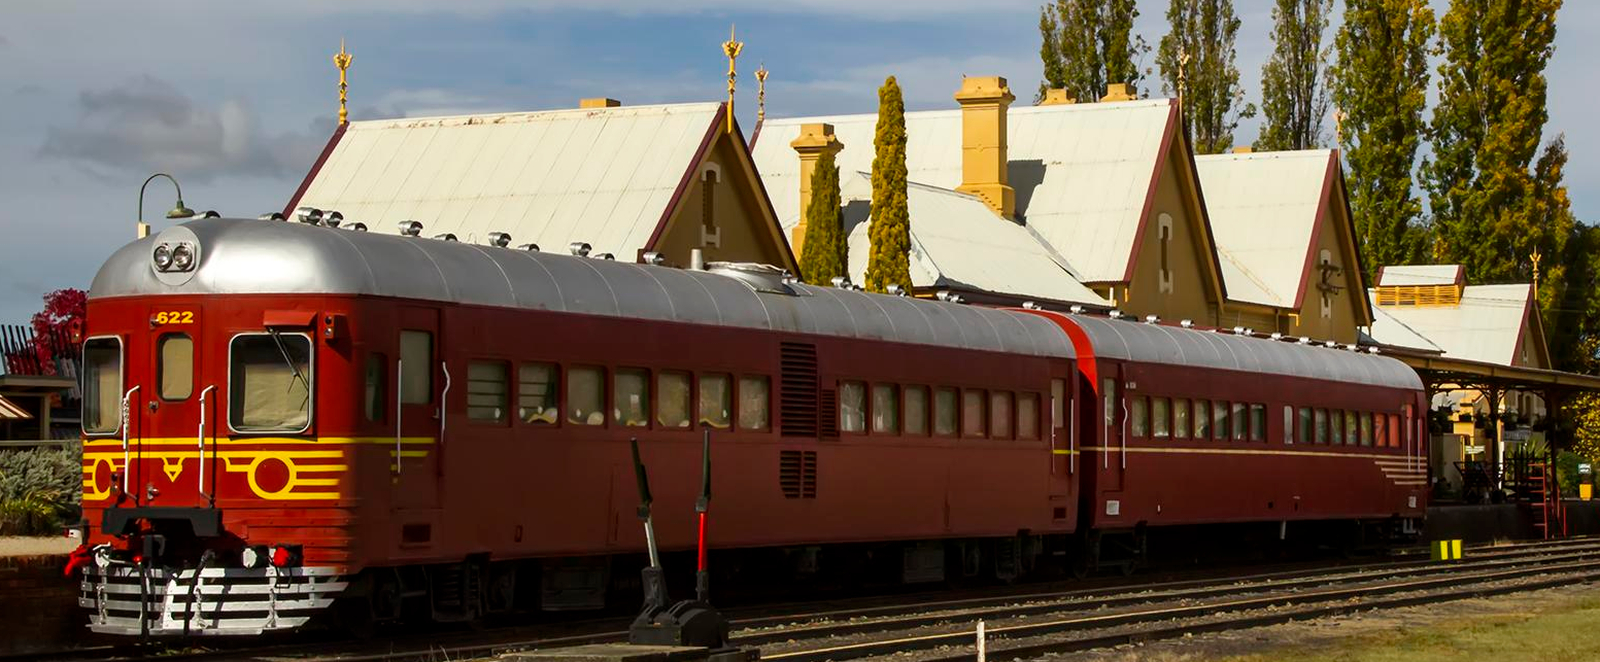 Nos. 622 and 726 converted to solar power as the “Byron Bay Train” at Temterfield Station in May 2014